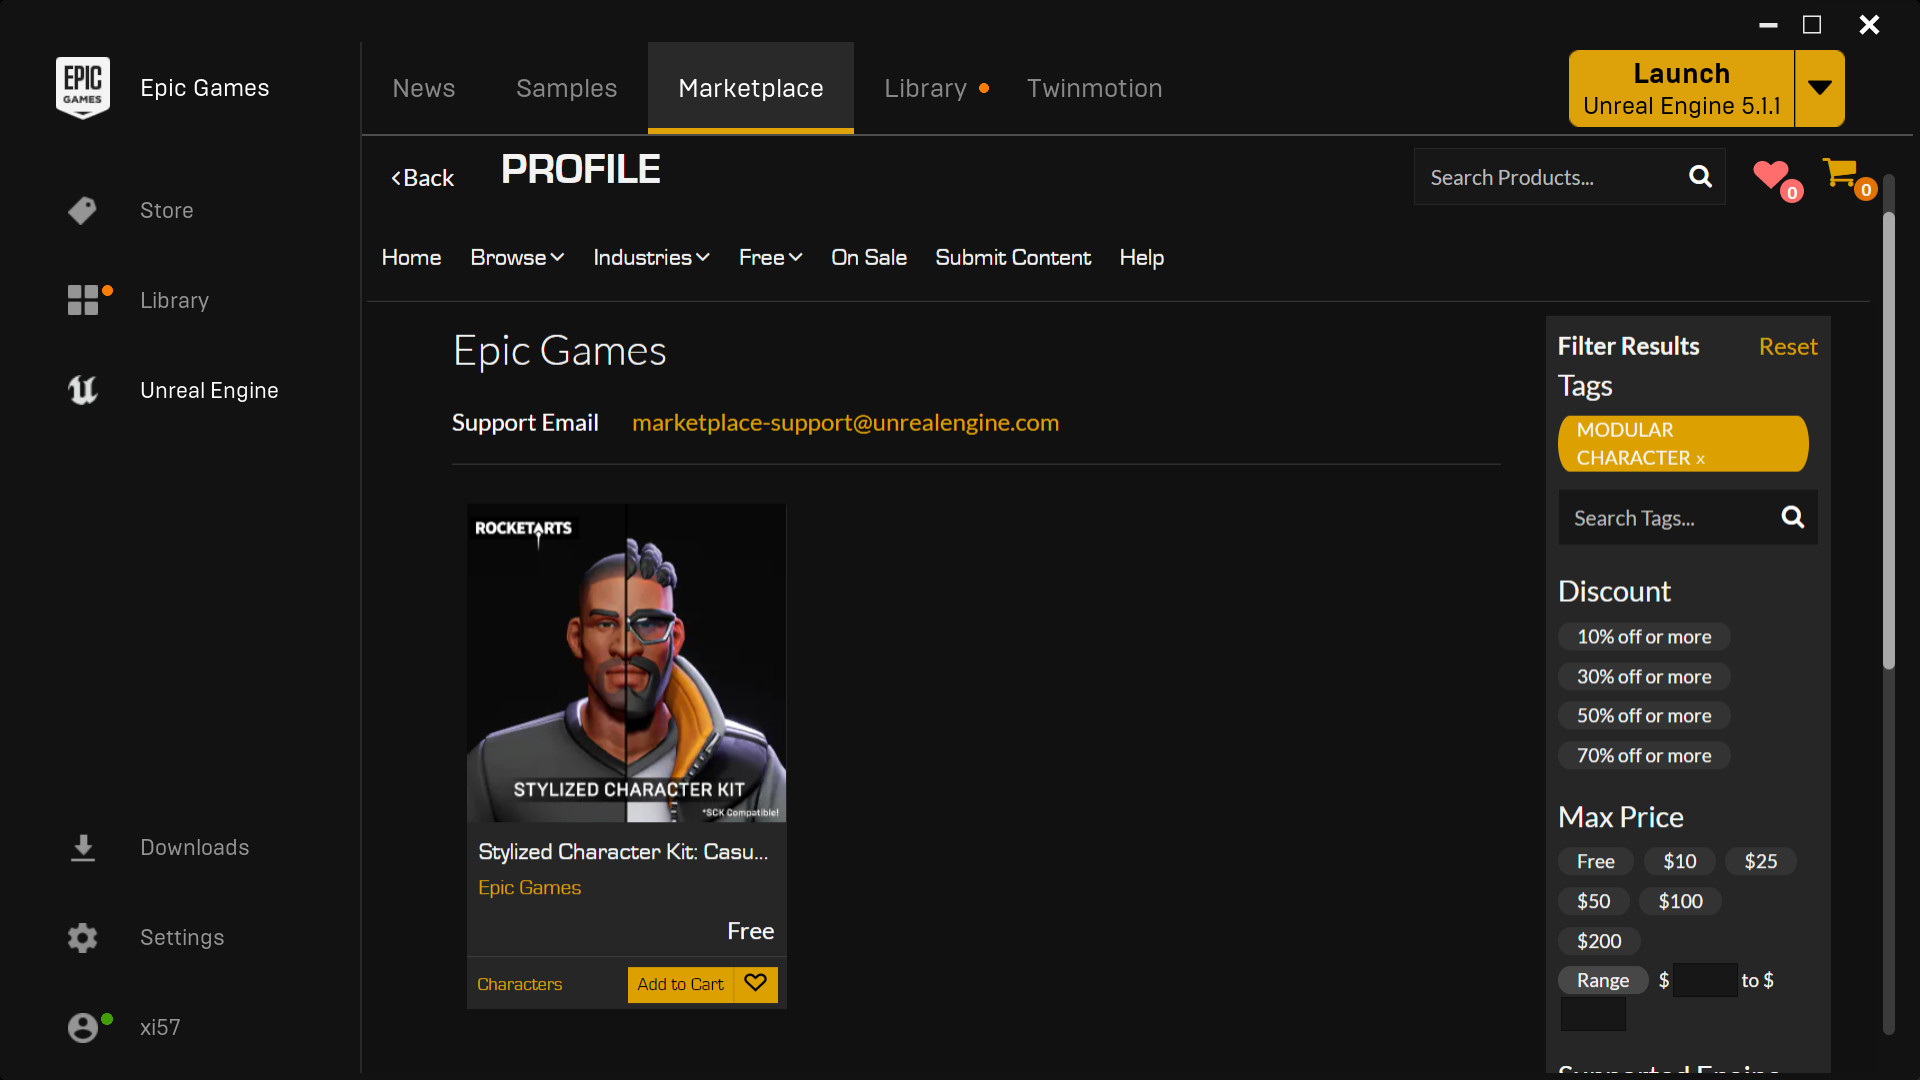 Free Modular Character on Epic Games Marketplace